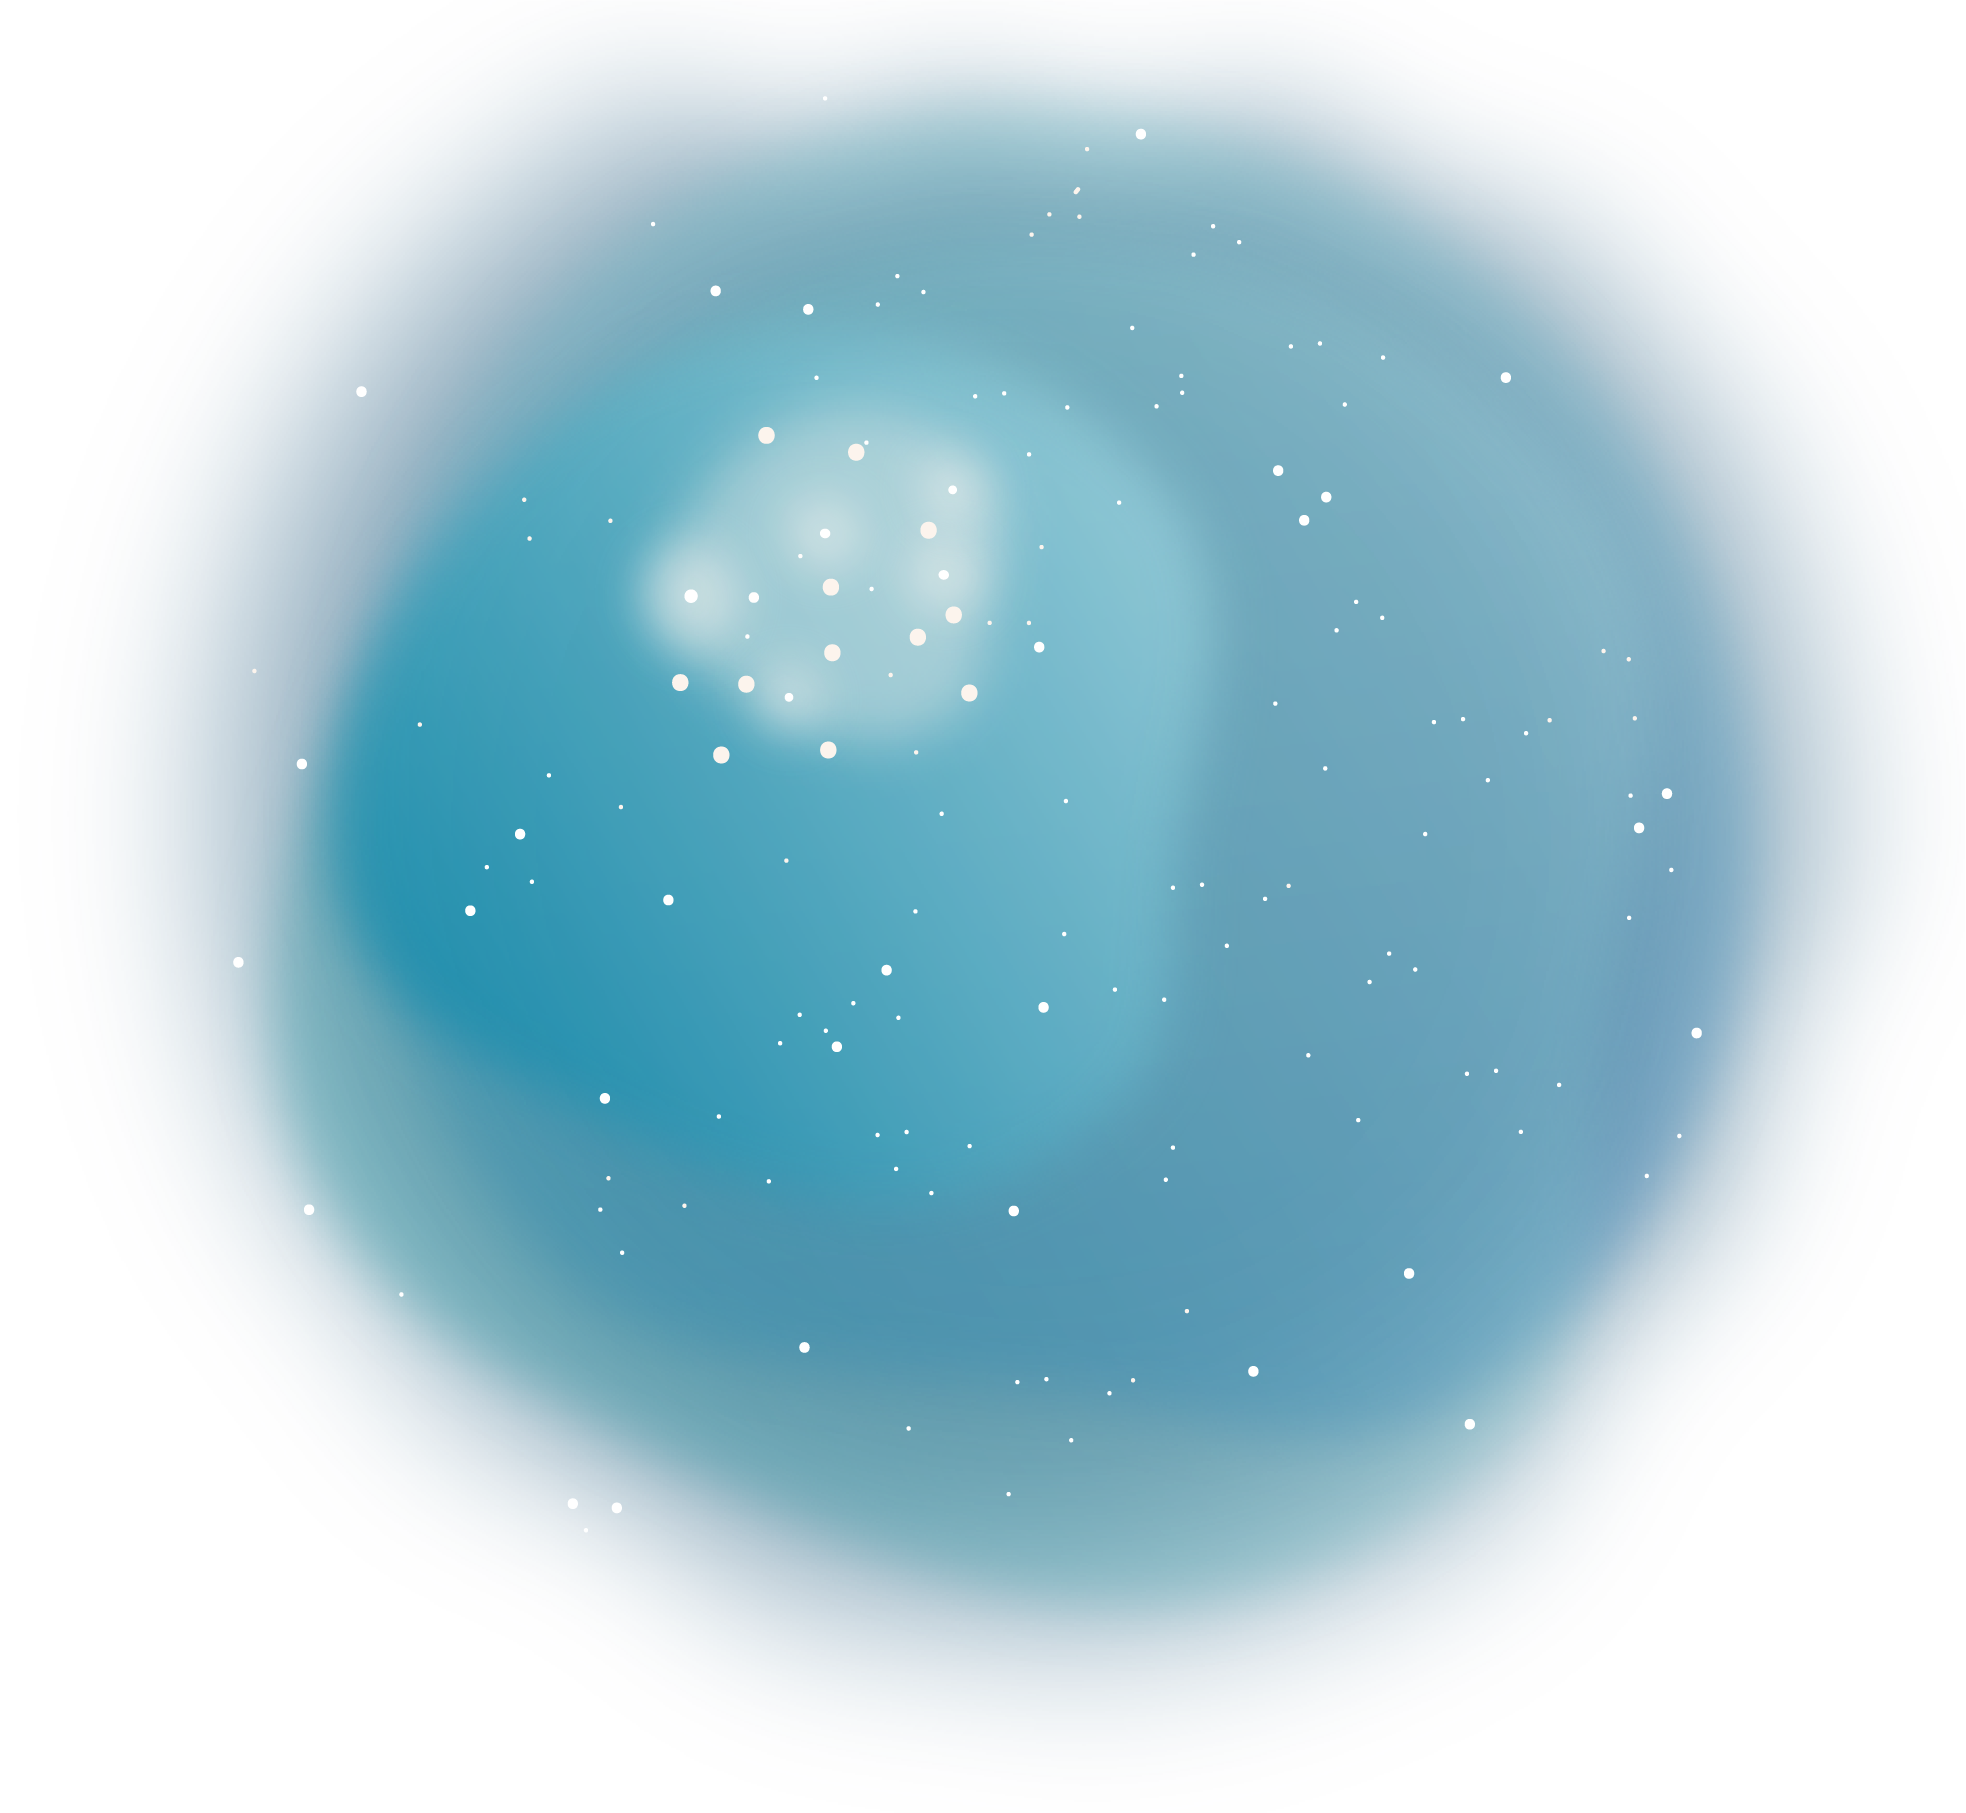 A large, amorphous blob in a circular shape has layers of transparent, hazy color overlapping. The different layers are a range of transparent blues, some greener shades than others. While white dots representing stars speckle the whole  image, in the upper left part  of this shape is a bright white circular cloud with more pronounced and larger stars grouped together.